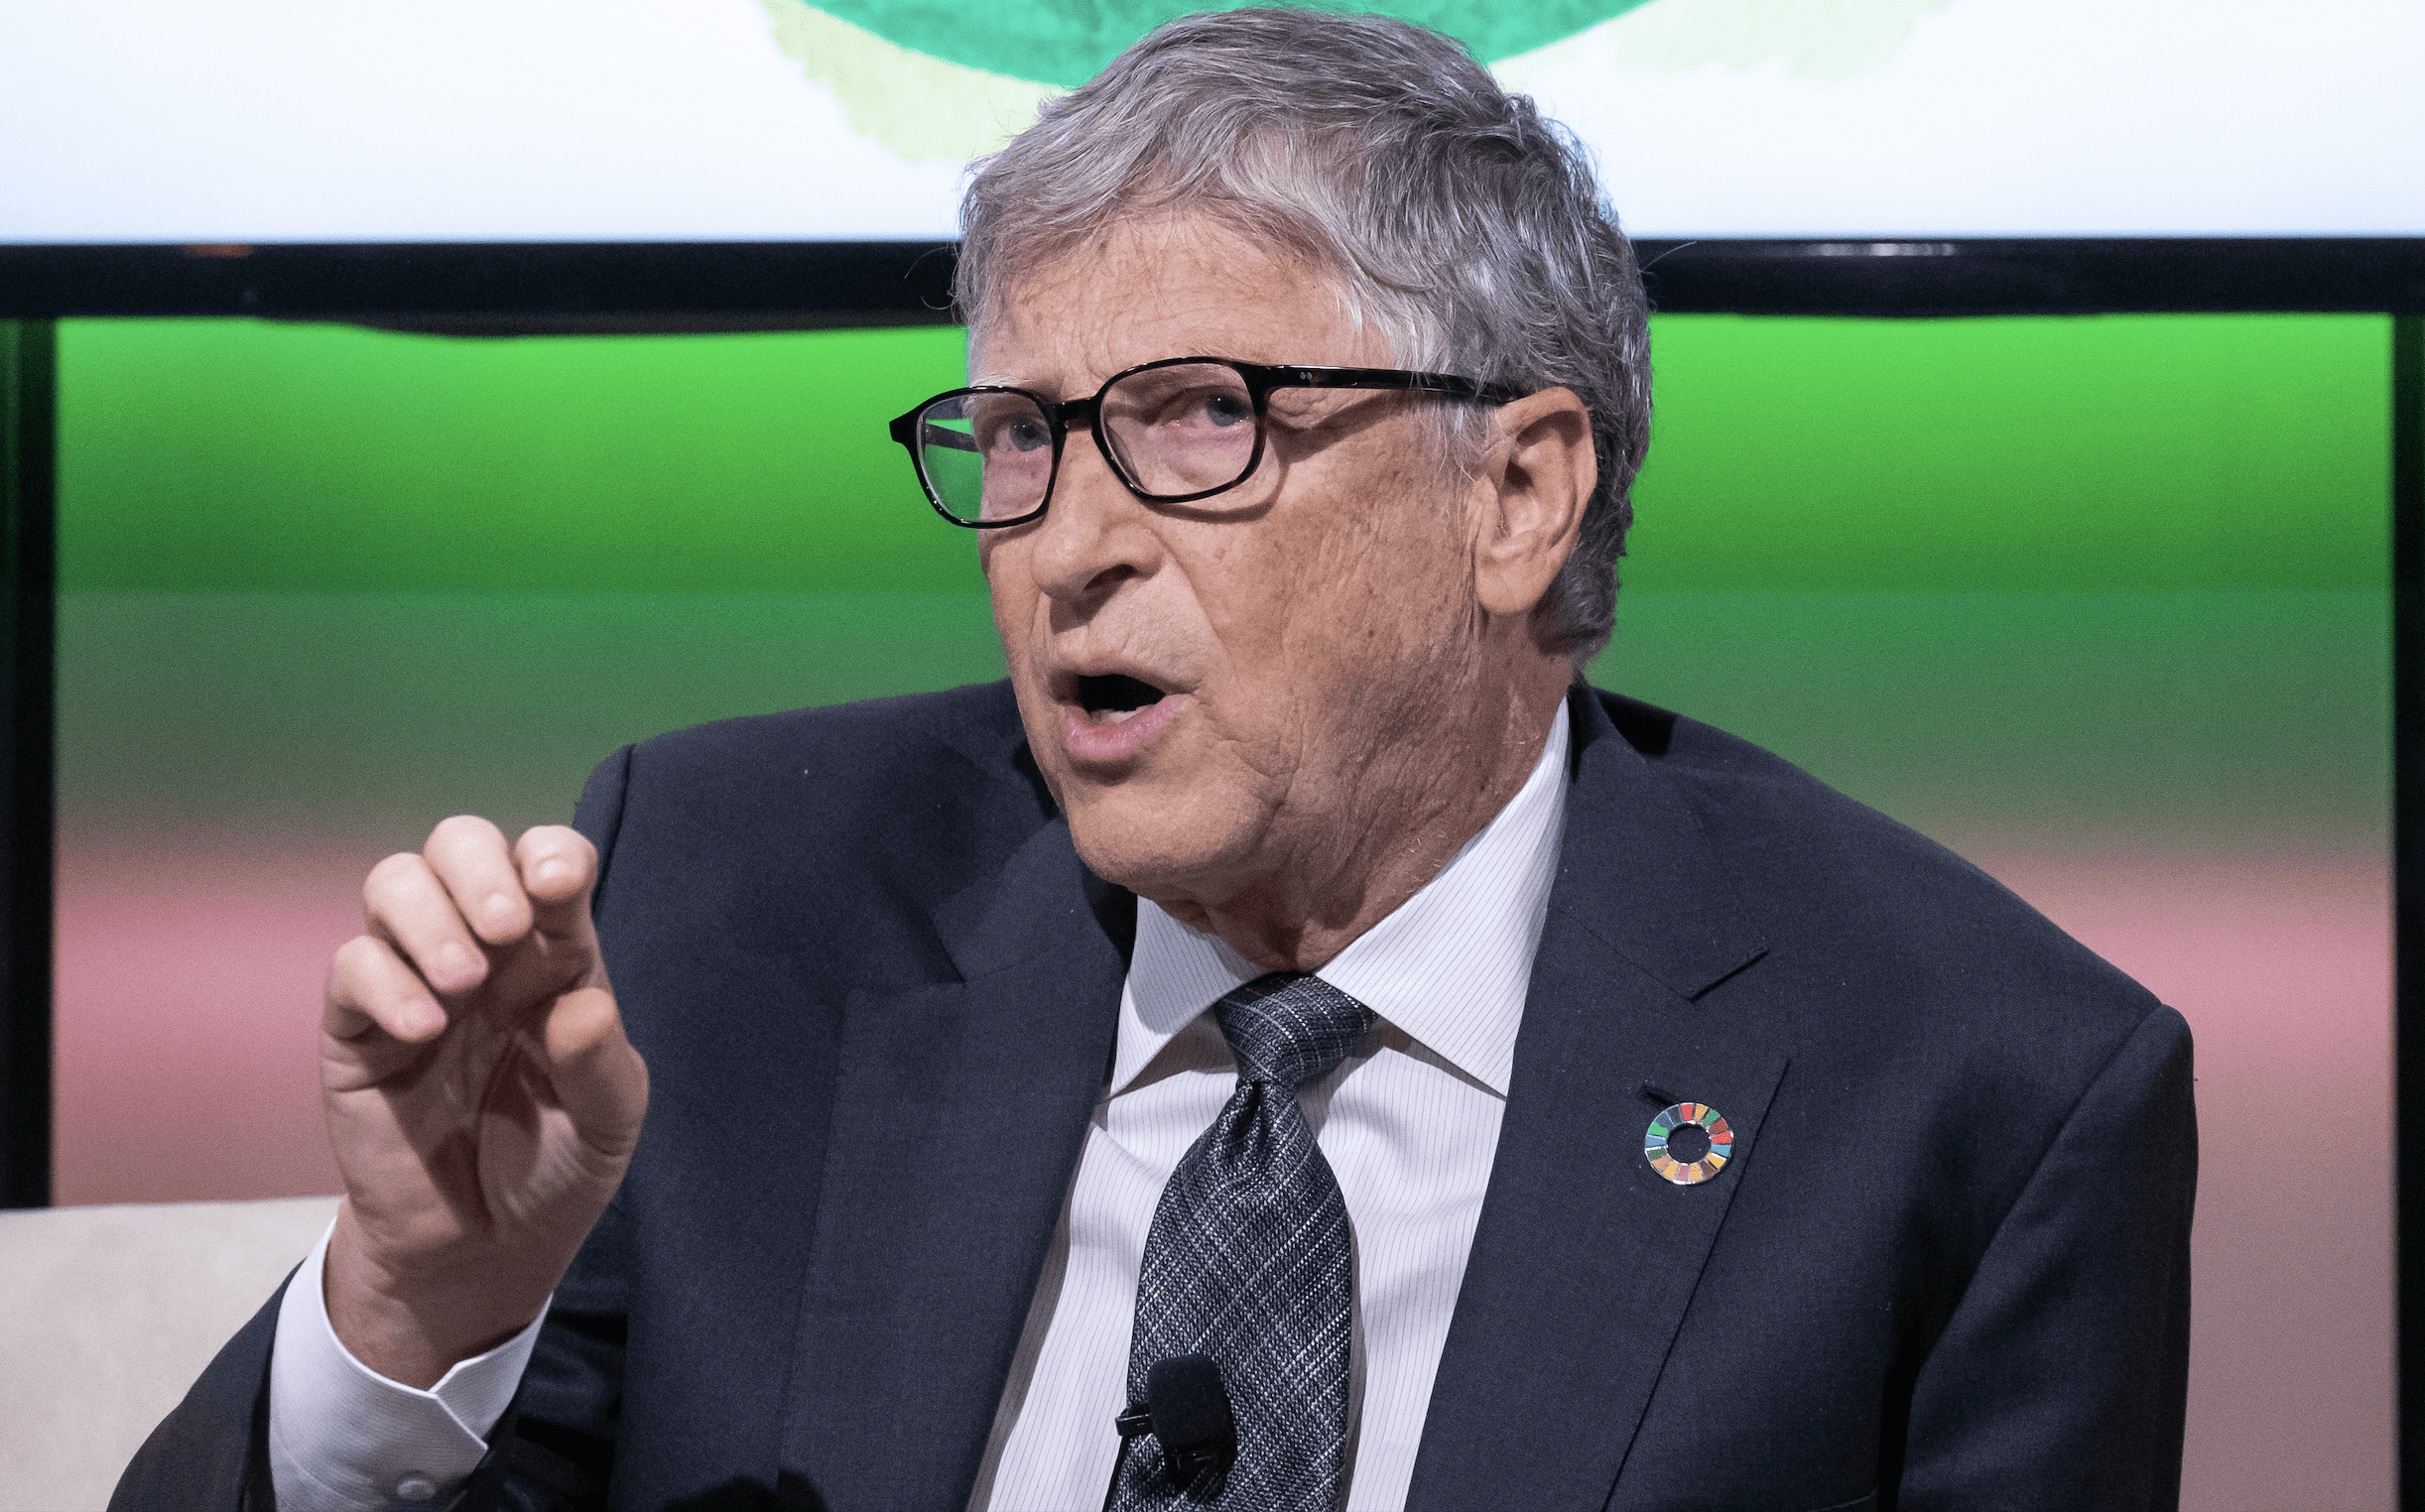 bill-gates-takes-surprising-shot-at-left-wing-climate-alarmists:-‘just-completely-not-solvable’